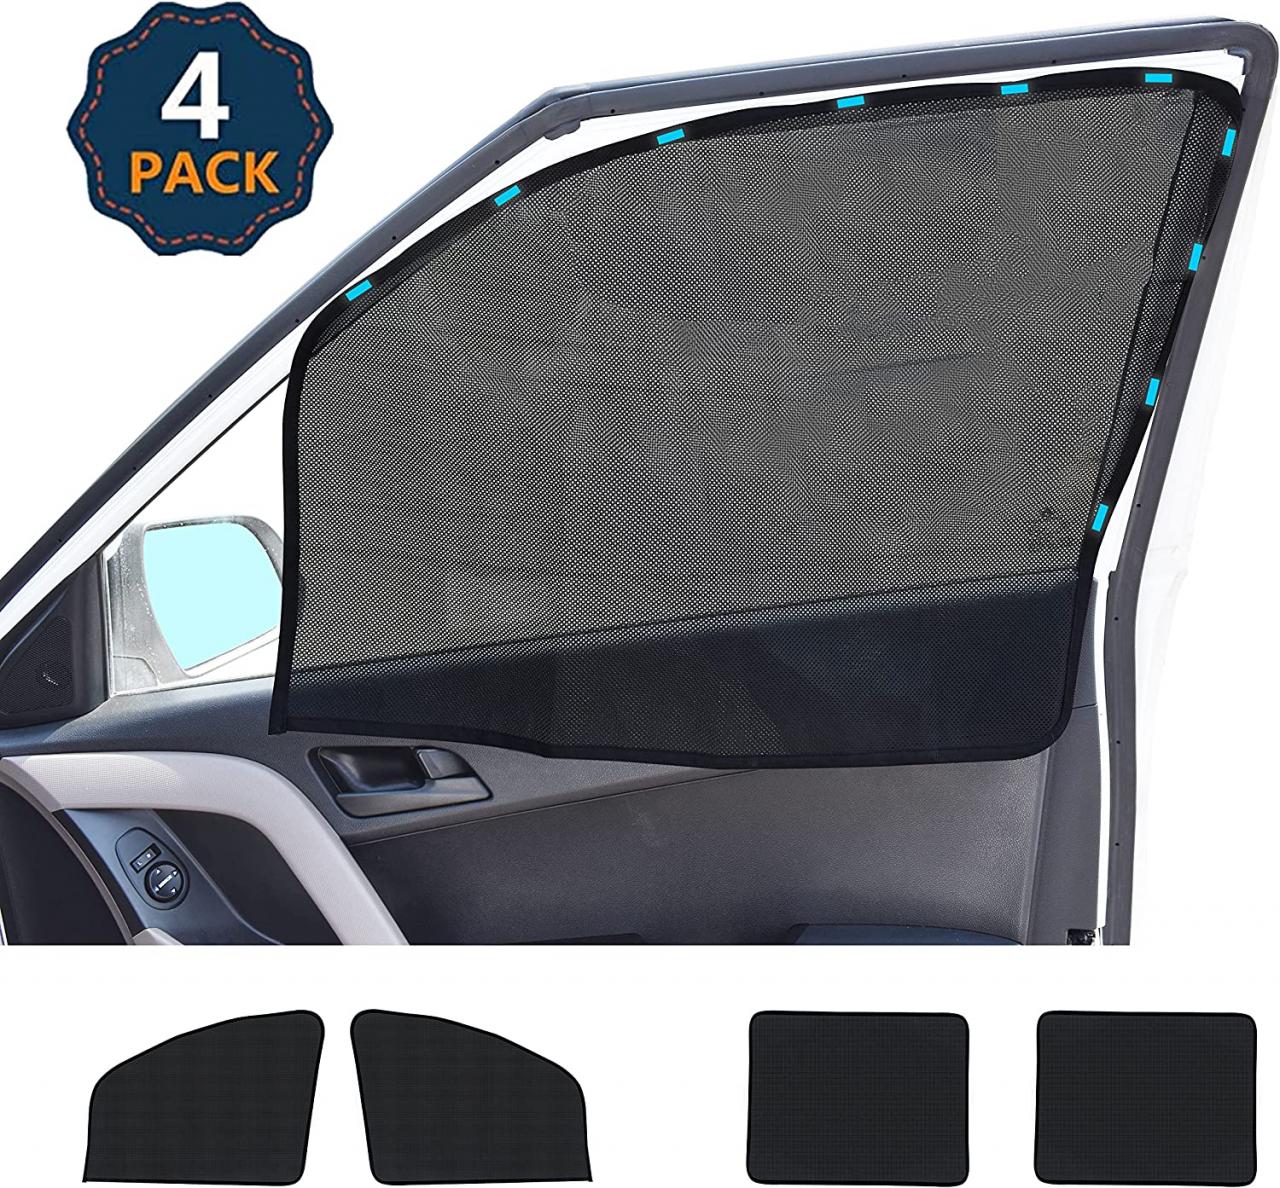 Review Analysis + Pros/Cons - EcoNour Car Windshield Sun Shade Blocks UV  Rays Sun Visor Protector Sunshade to Keep Your Vehicle Cool and Damage Free  Easy to Use Fits Windshields of Various